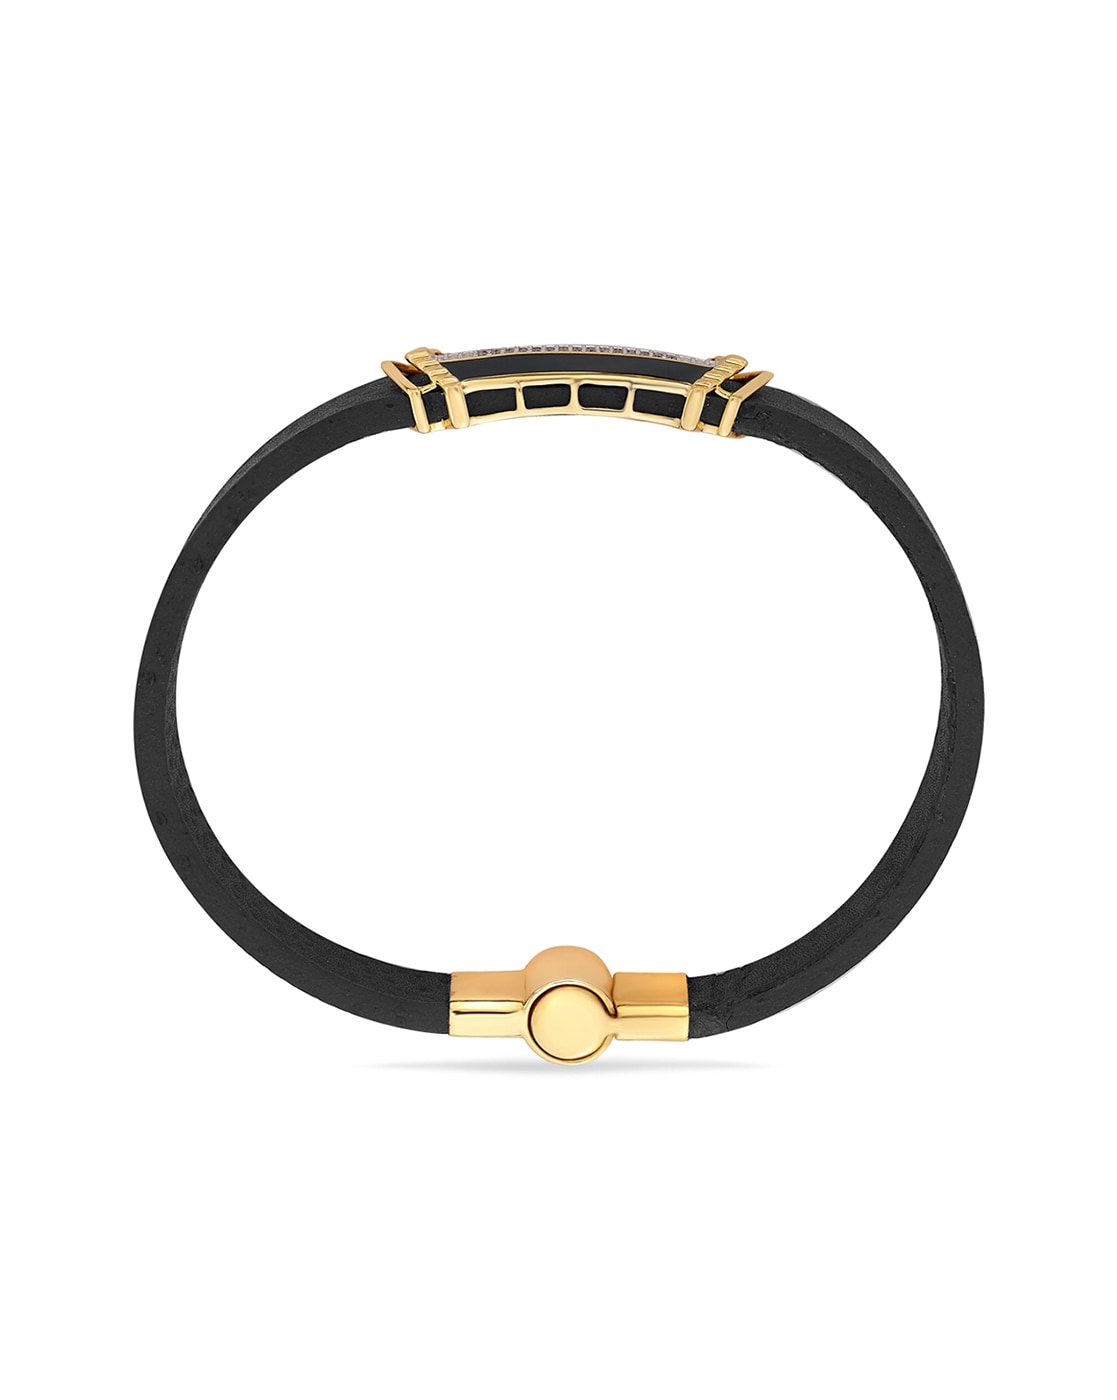 Chevron Bracelet in Black Rubber with 18K Yellow Gold and Diamonds, 6mm